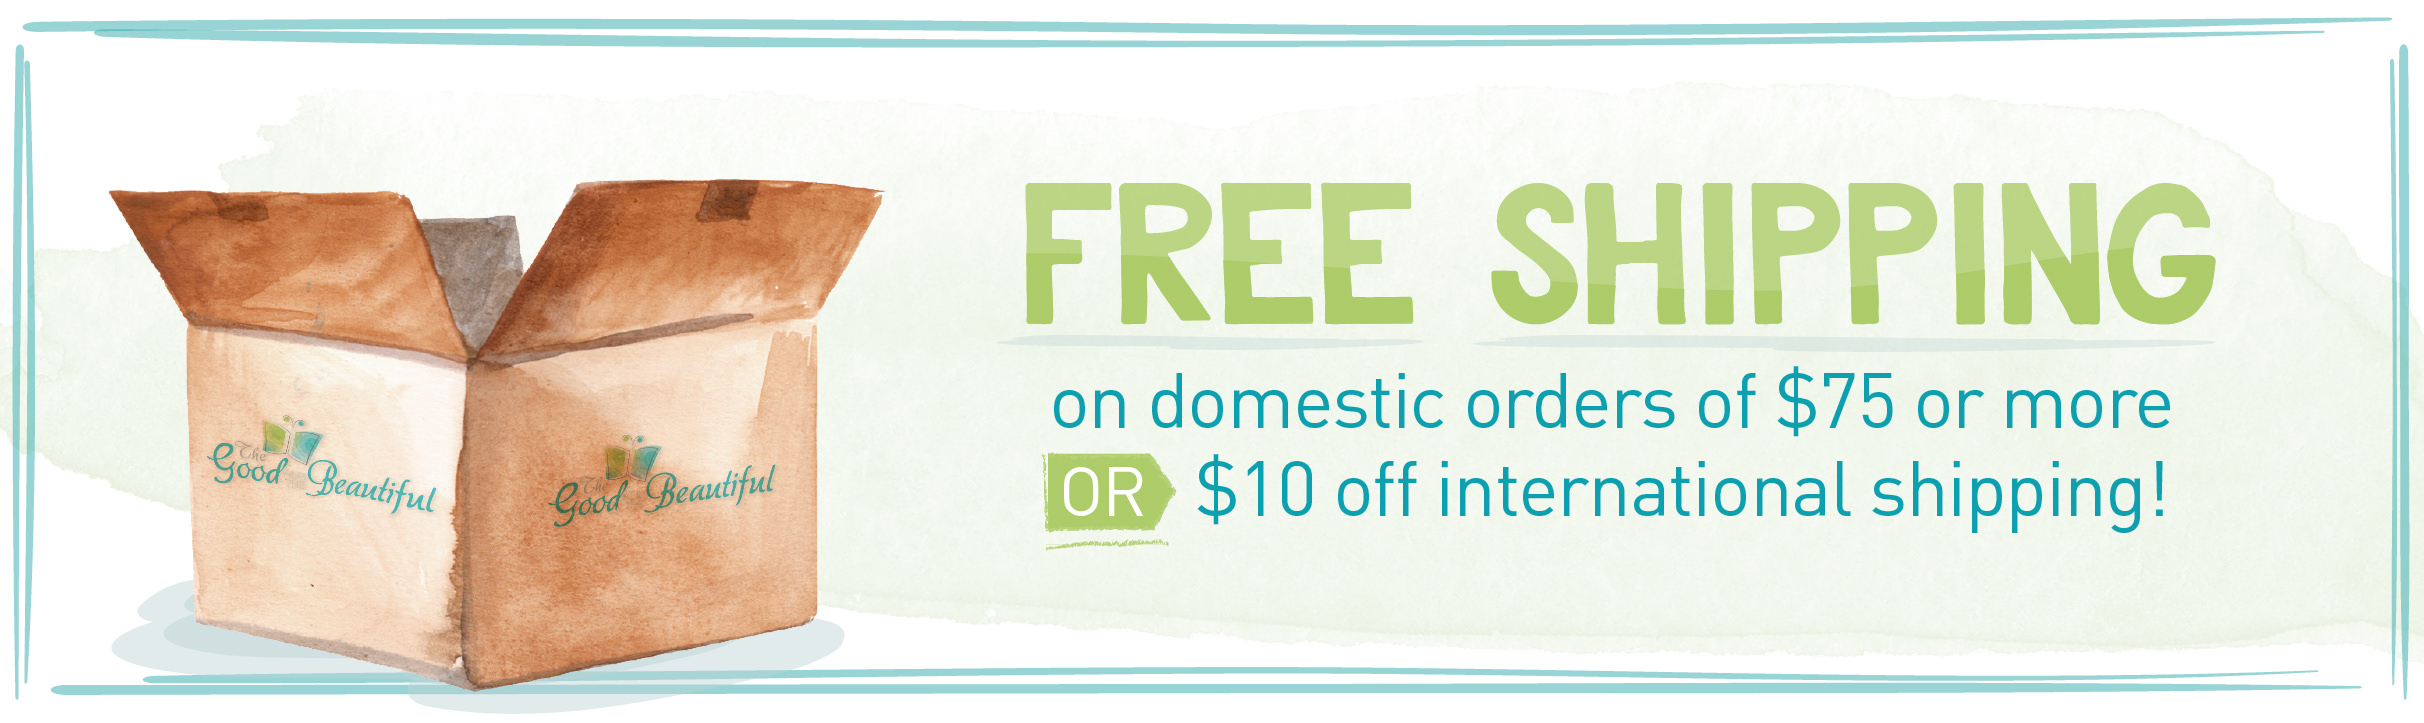  FREE SHIPPING on domestic orders of $75 or more 313 $10 off international shipping! B 